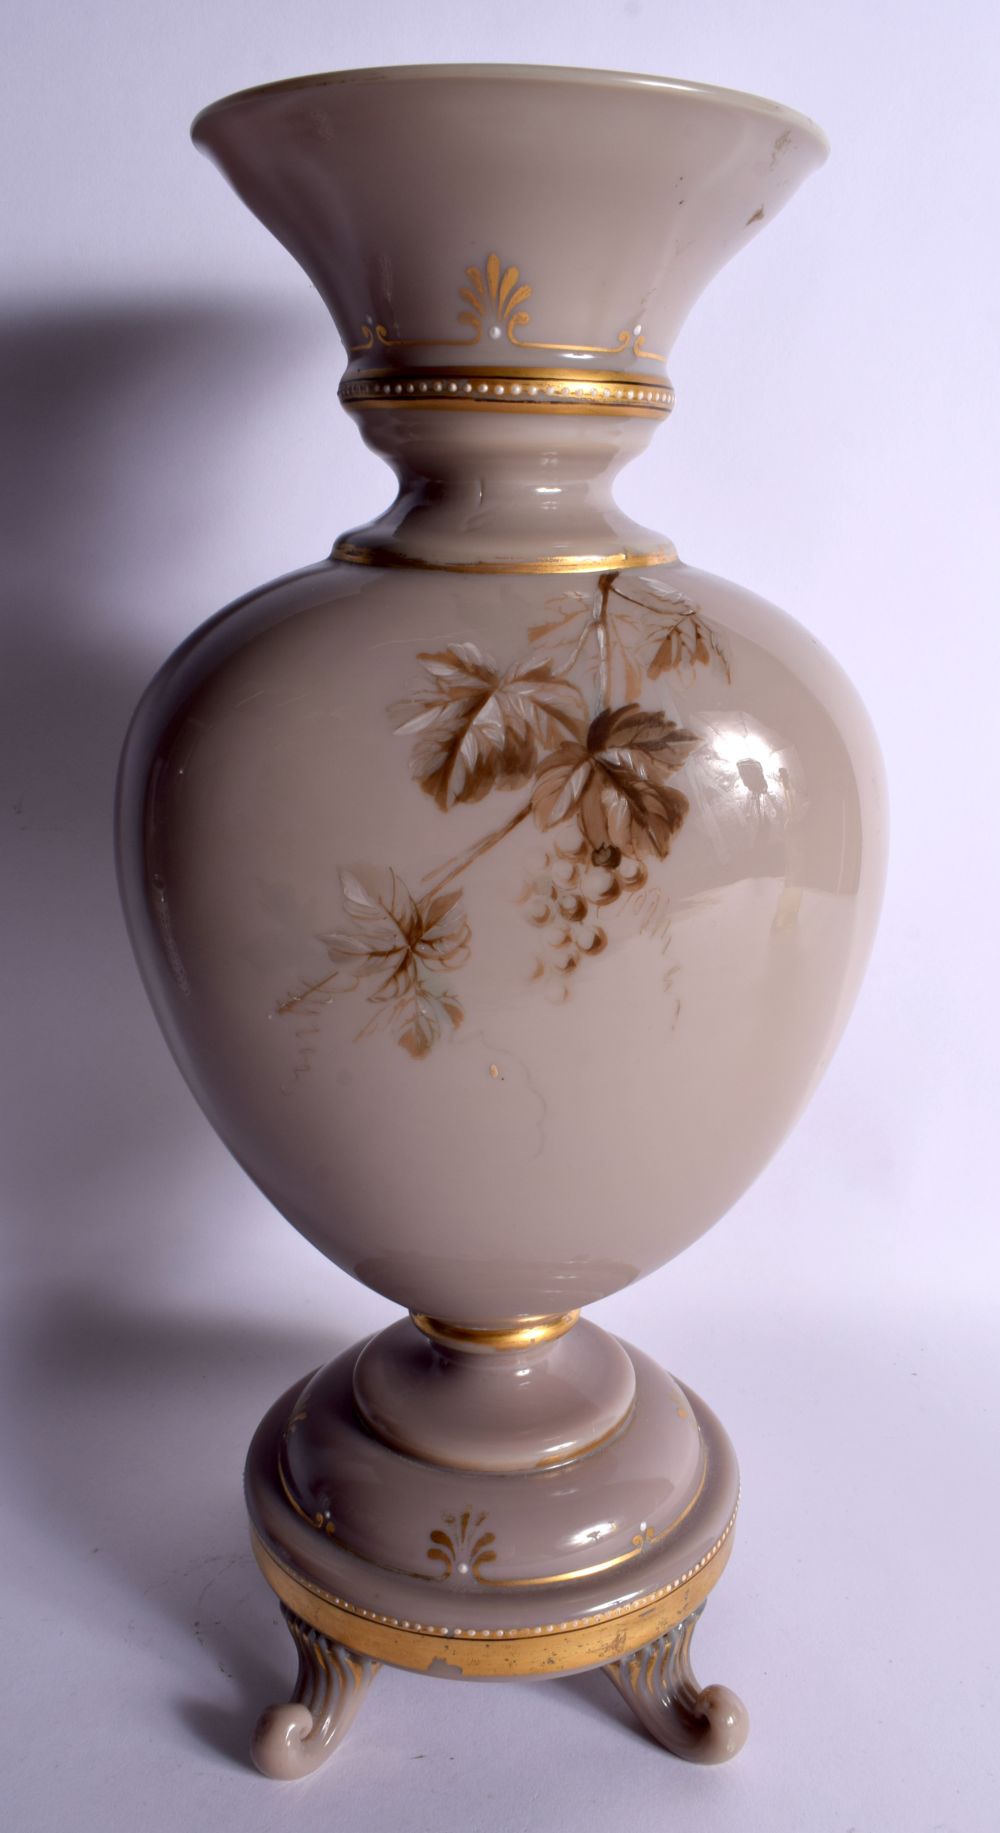 A LARGE LATE VICTORIAN OPALINE GLASS VASE painted with berries and leaves. 36 cm x 15 cm. - Image 3 of 6